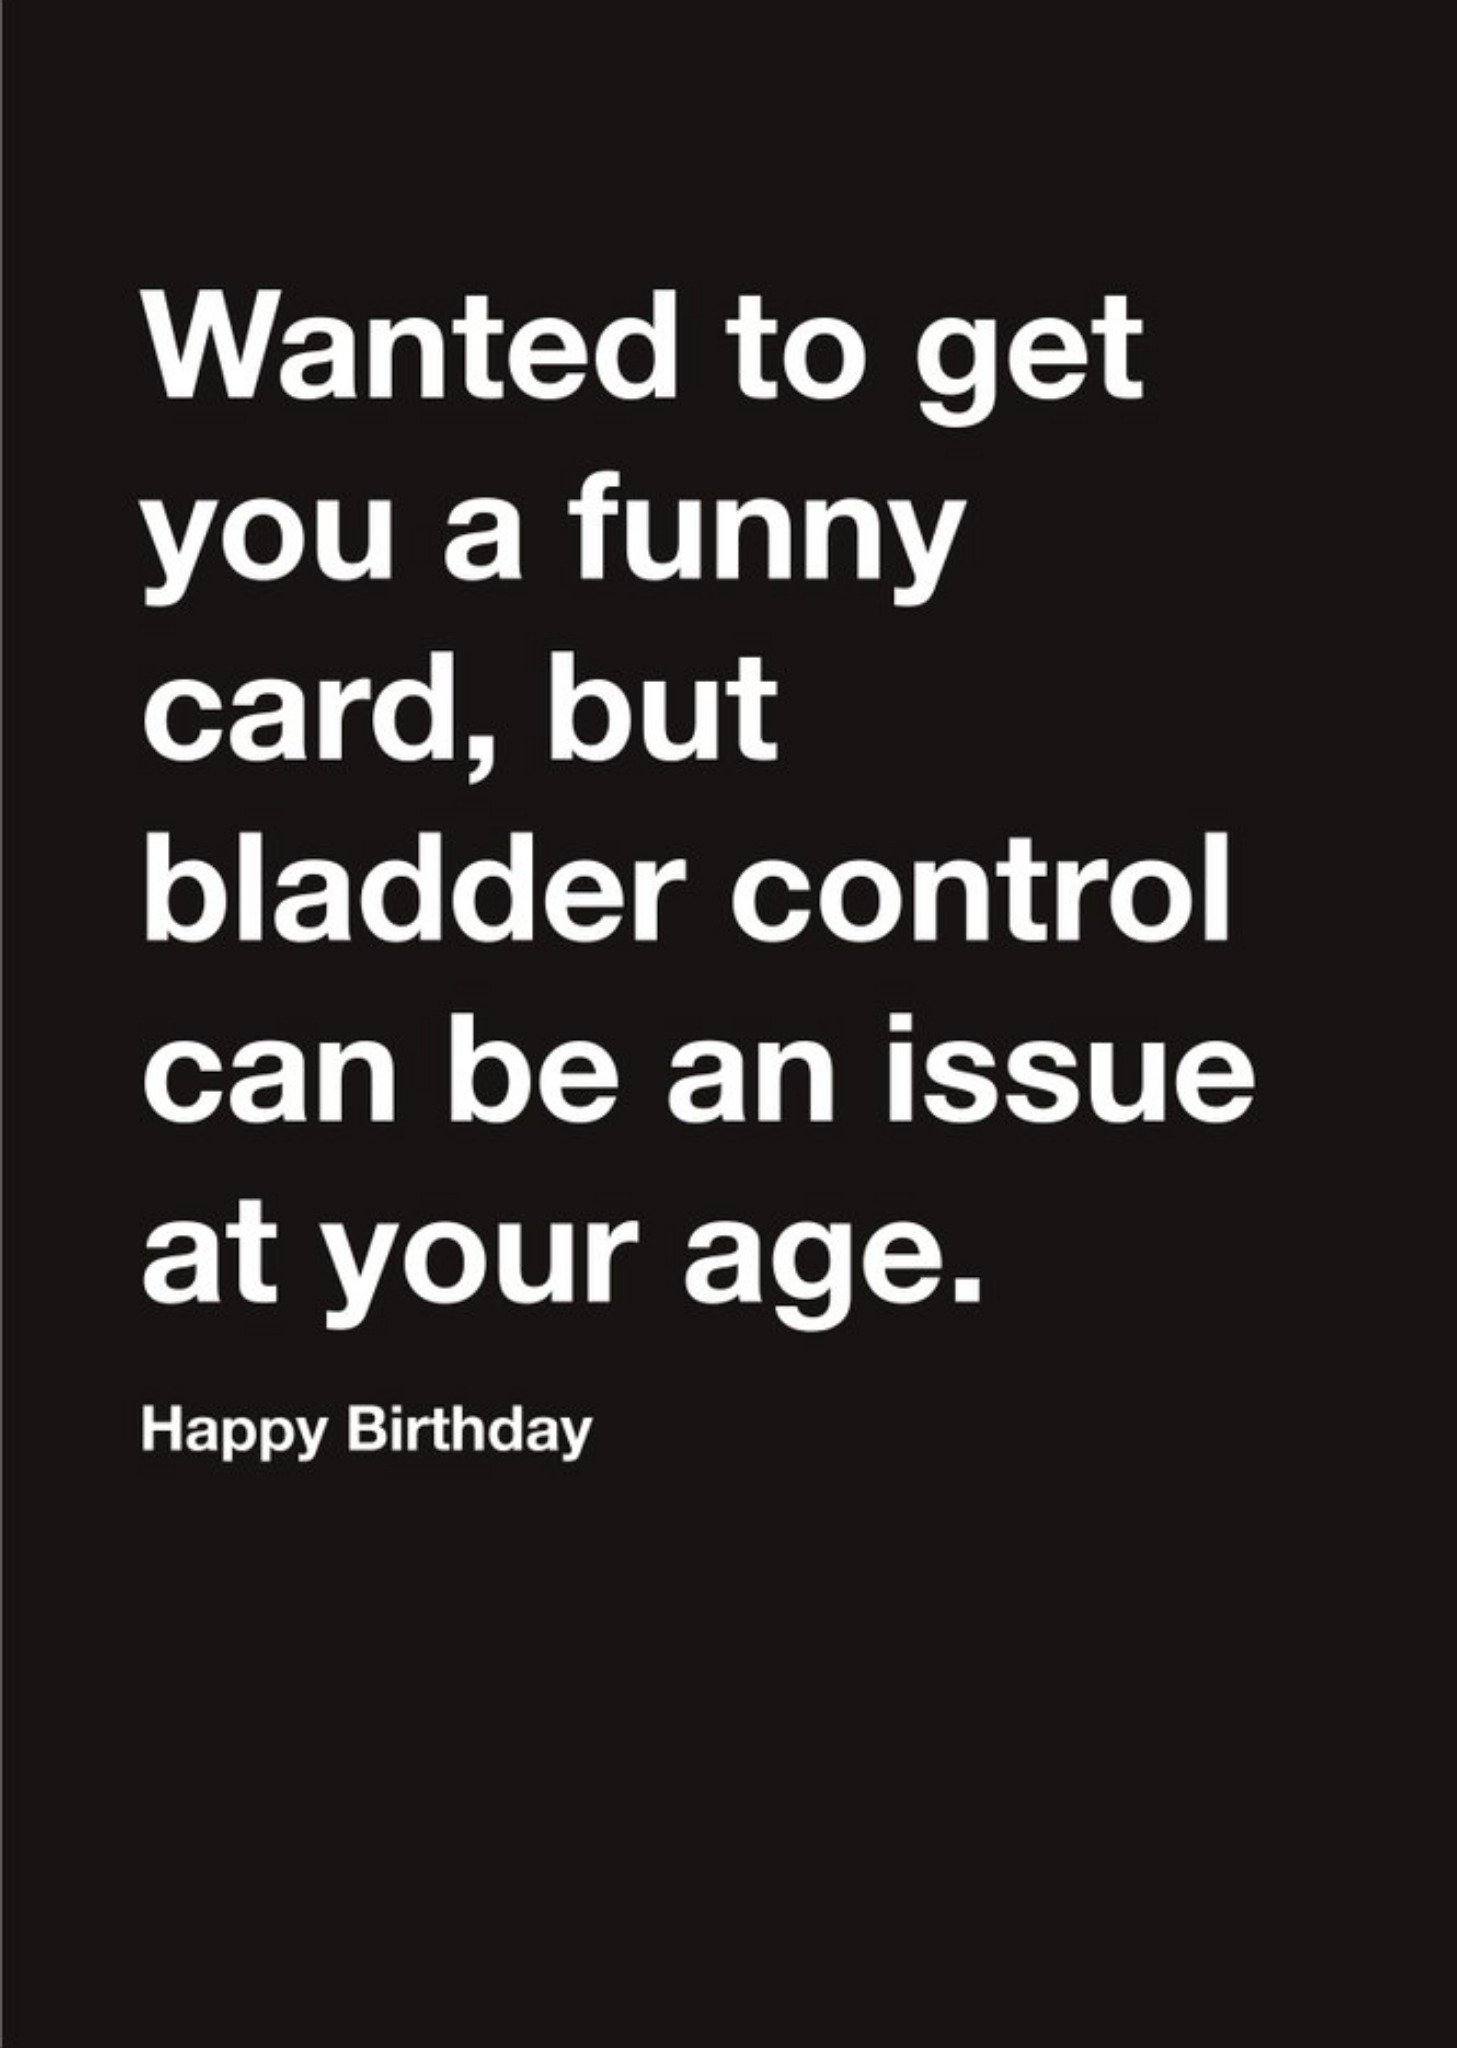 Moonpig Carte Blanche Funny Card Bladder Control Issues Happy Birthday Card, Large